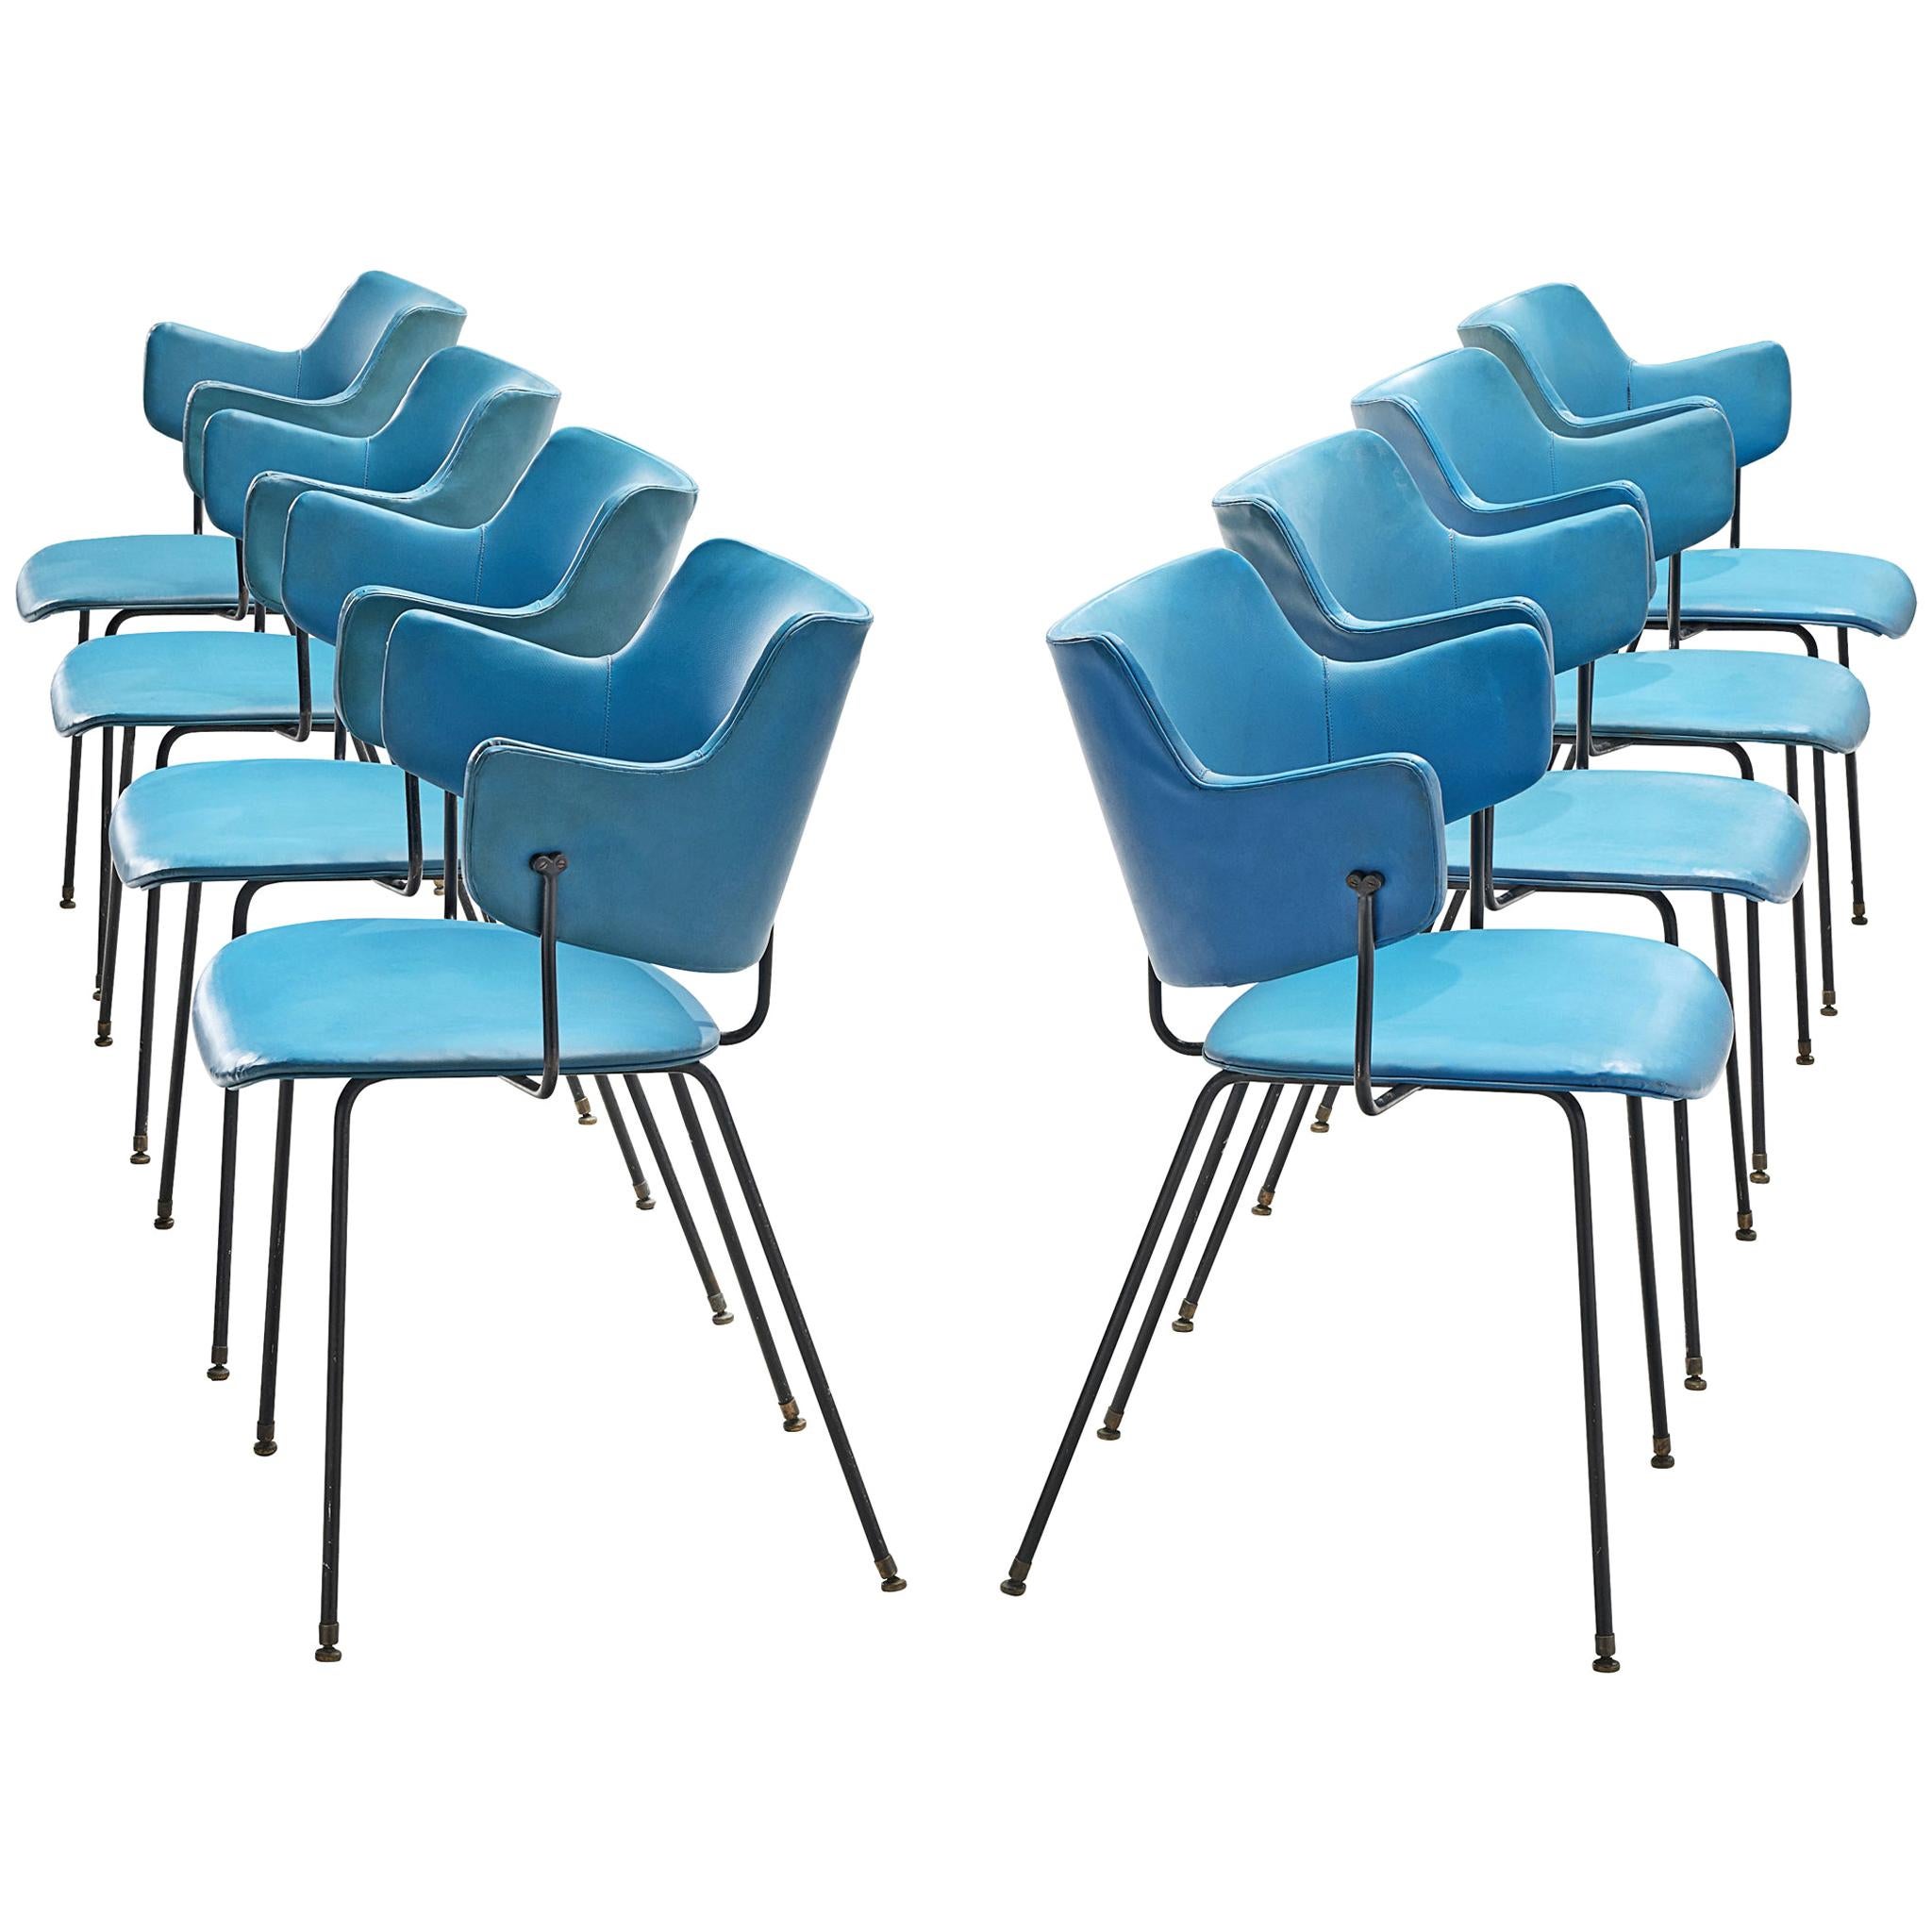 Wim Rietveld and W.H. Gispen Blue '205' Chairs for Kembo, Netherlands